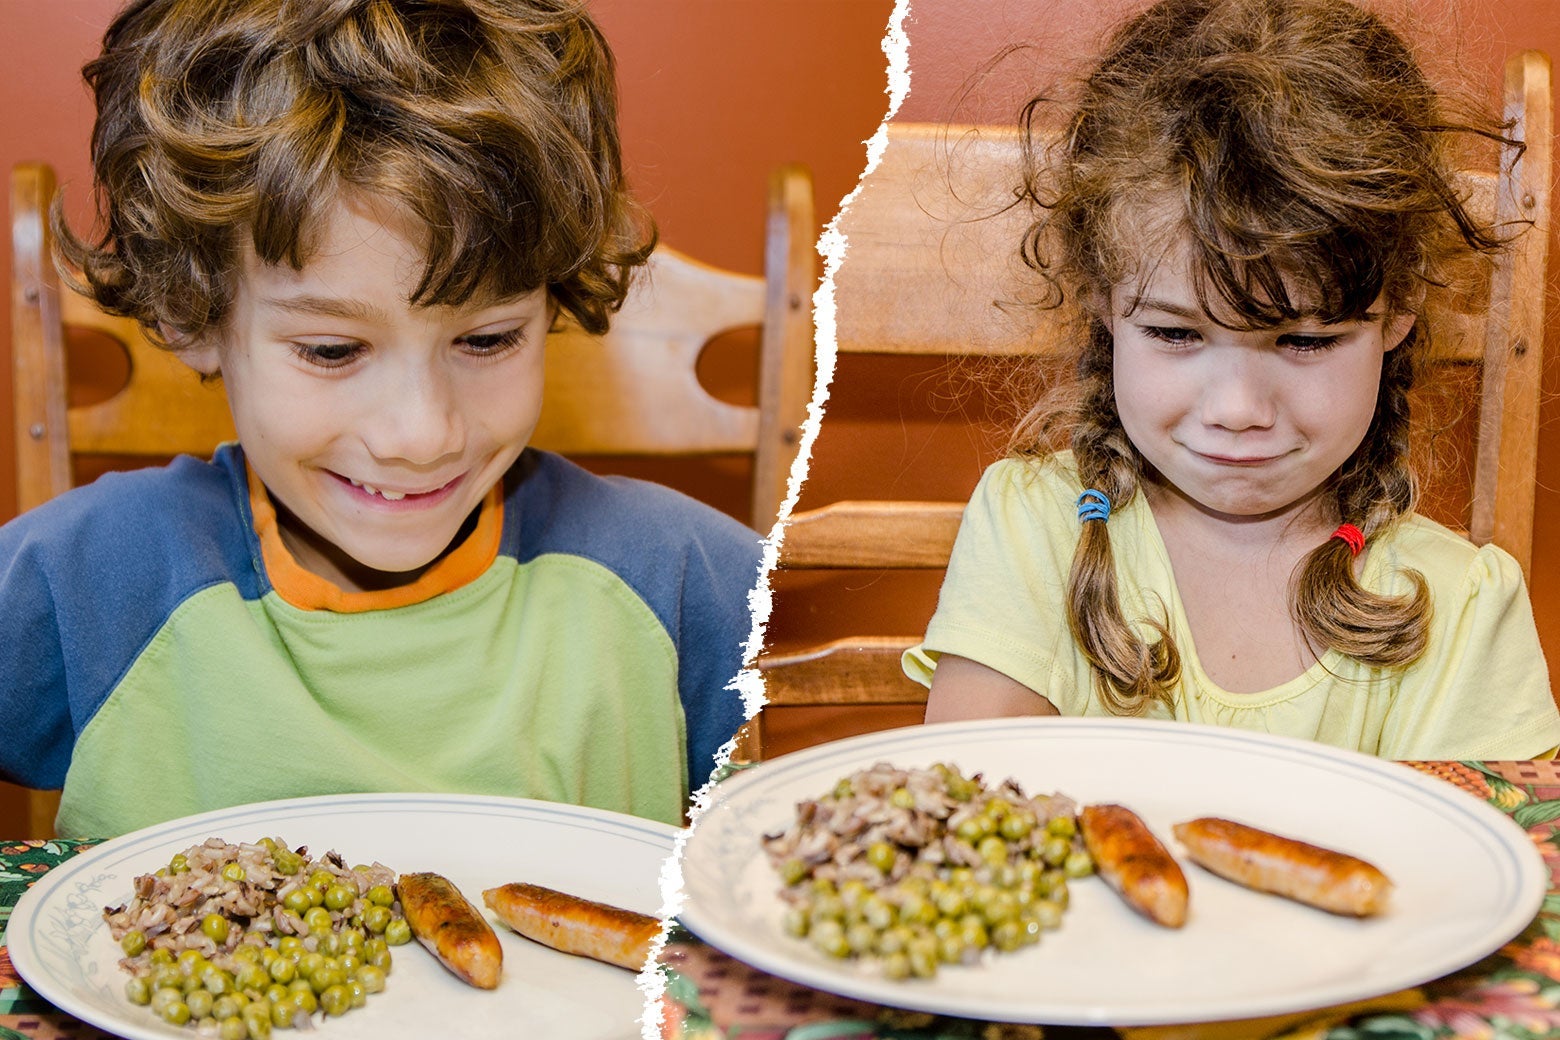 Diptych of one child excited about and one child repulsed by the same plate of peas, rice, and sausage links.